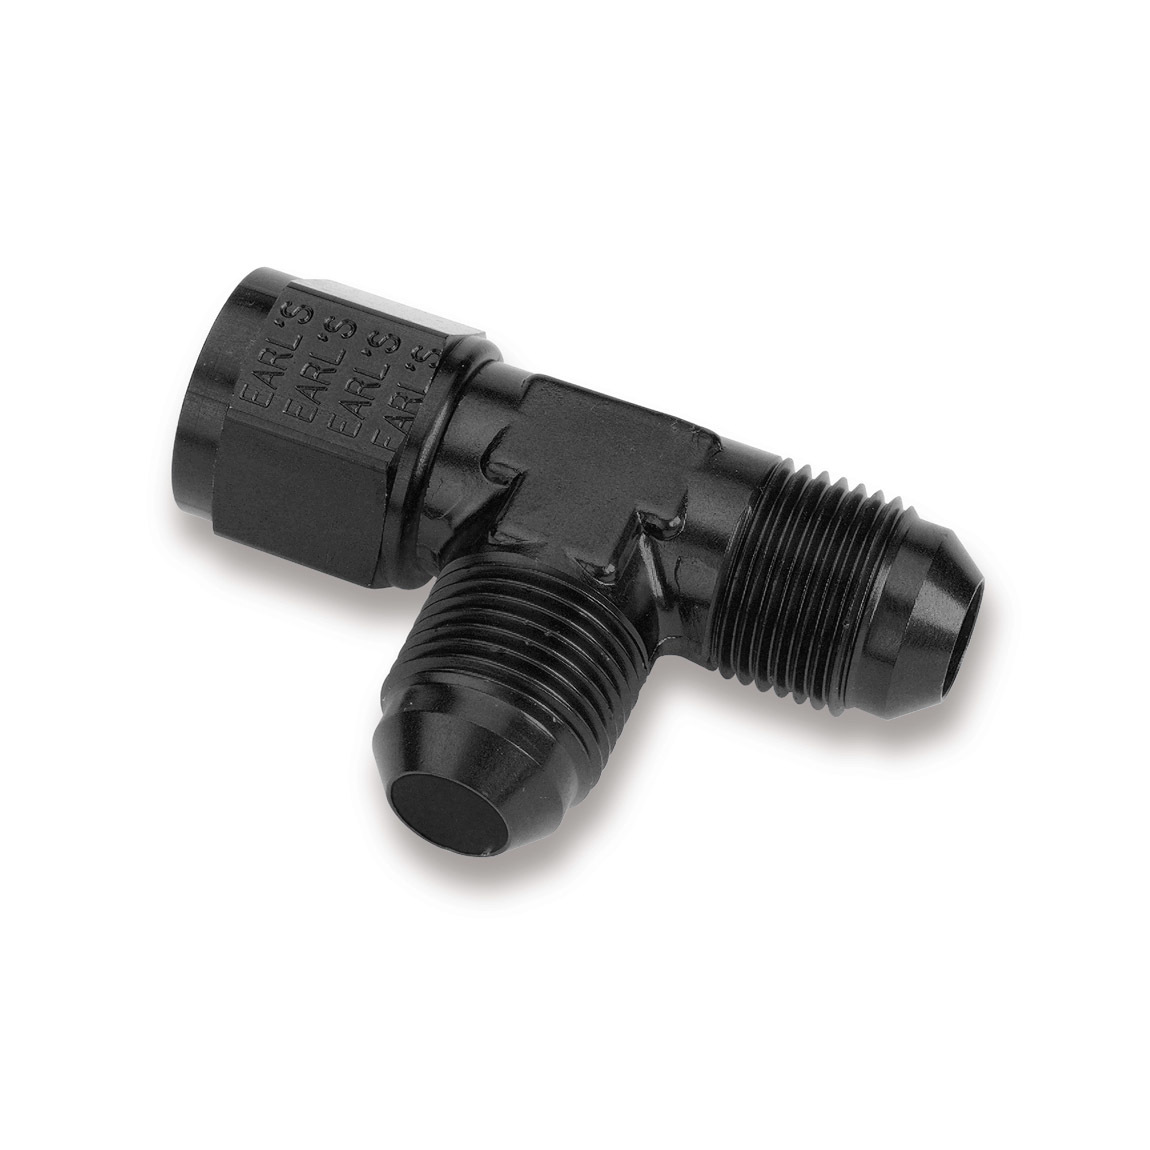 Earls AT926106ERL Fitting, Adapter Tee, 6 AN Female Swivel x 6 AN Male x 6 AN Male, Aluminum, Black Anodized, Each